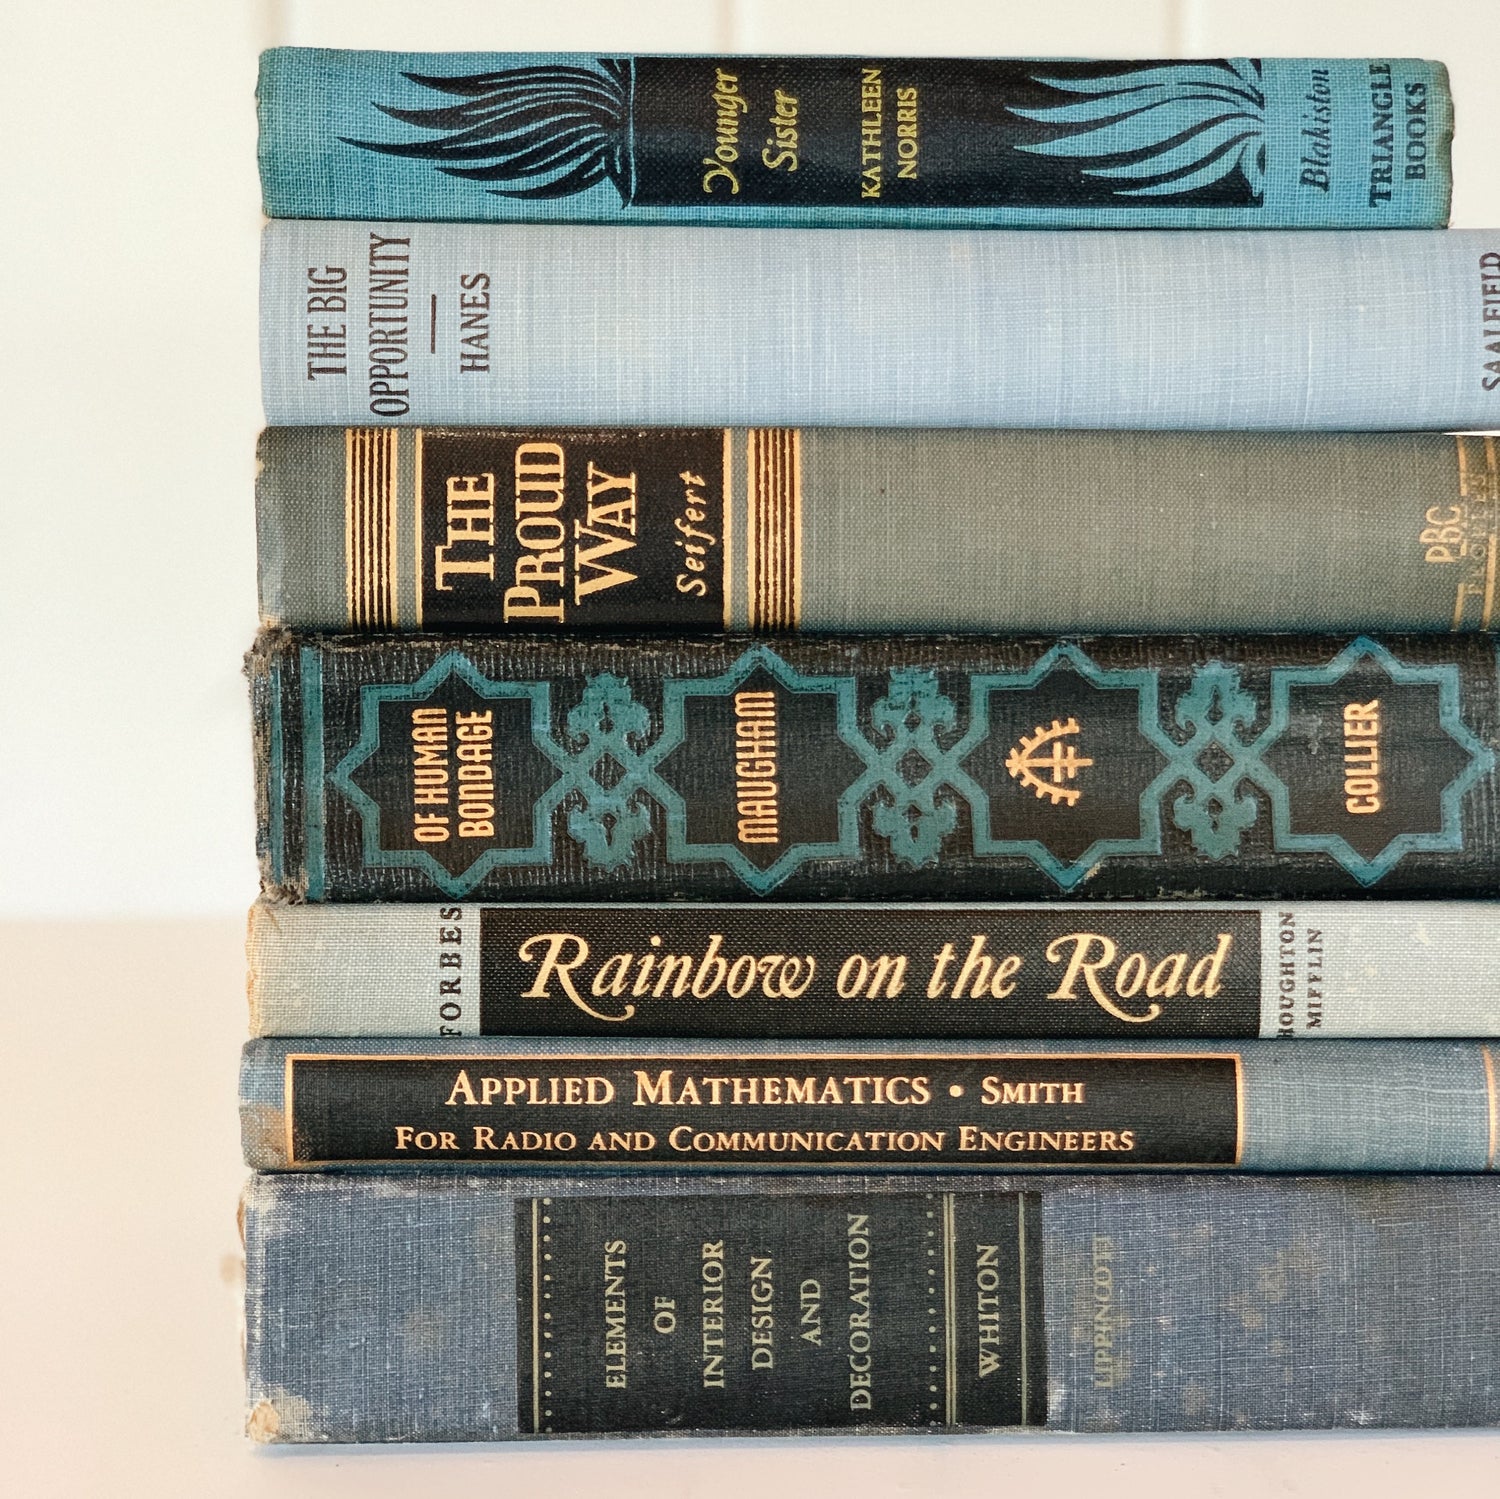 Blue and Black Vintage Decorative Books for Shelf Styling and Mid-Century Modern Decor